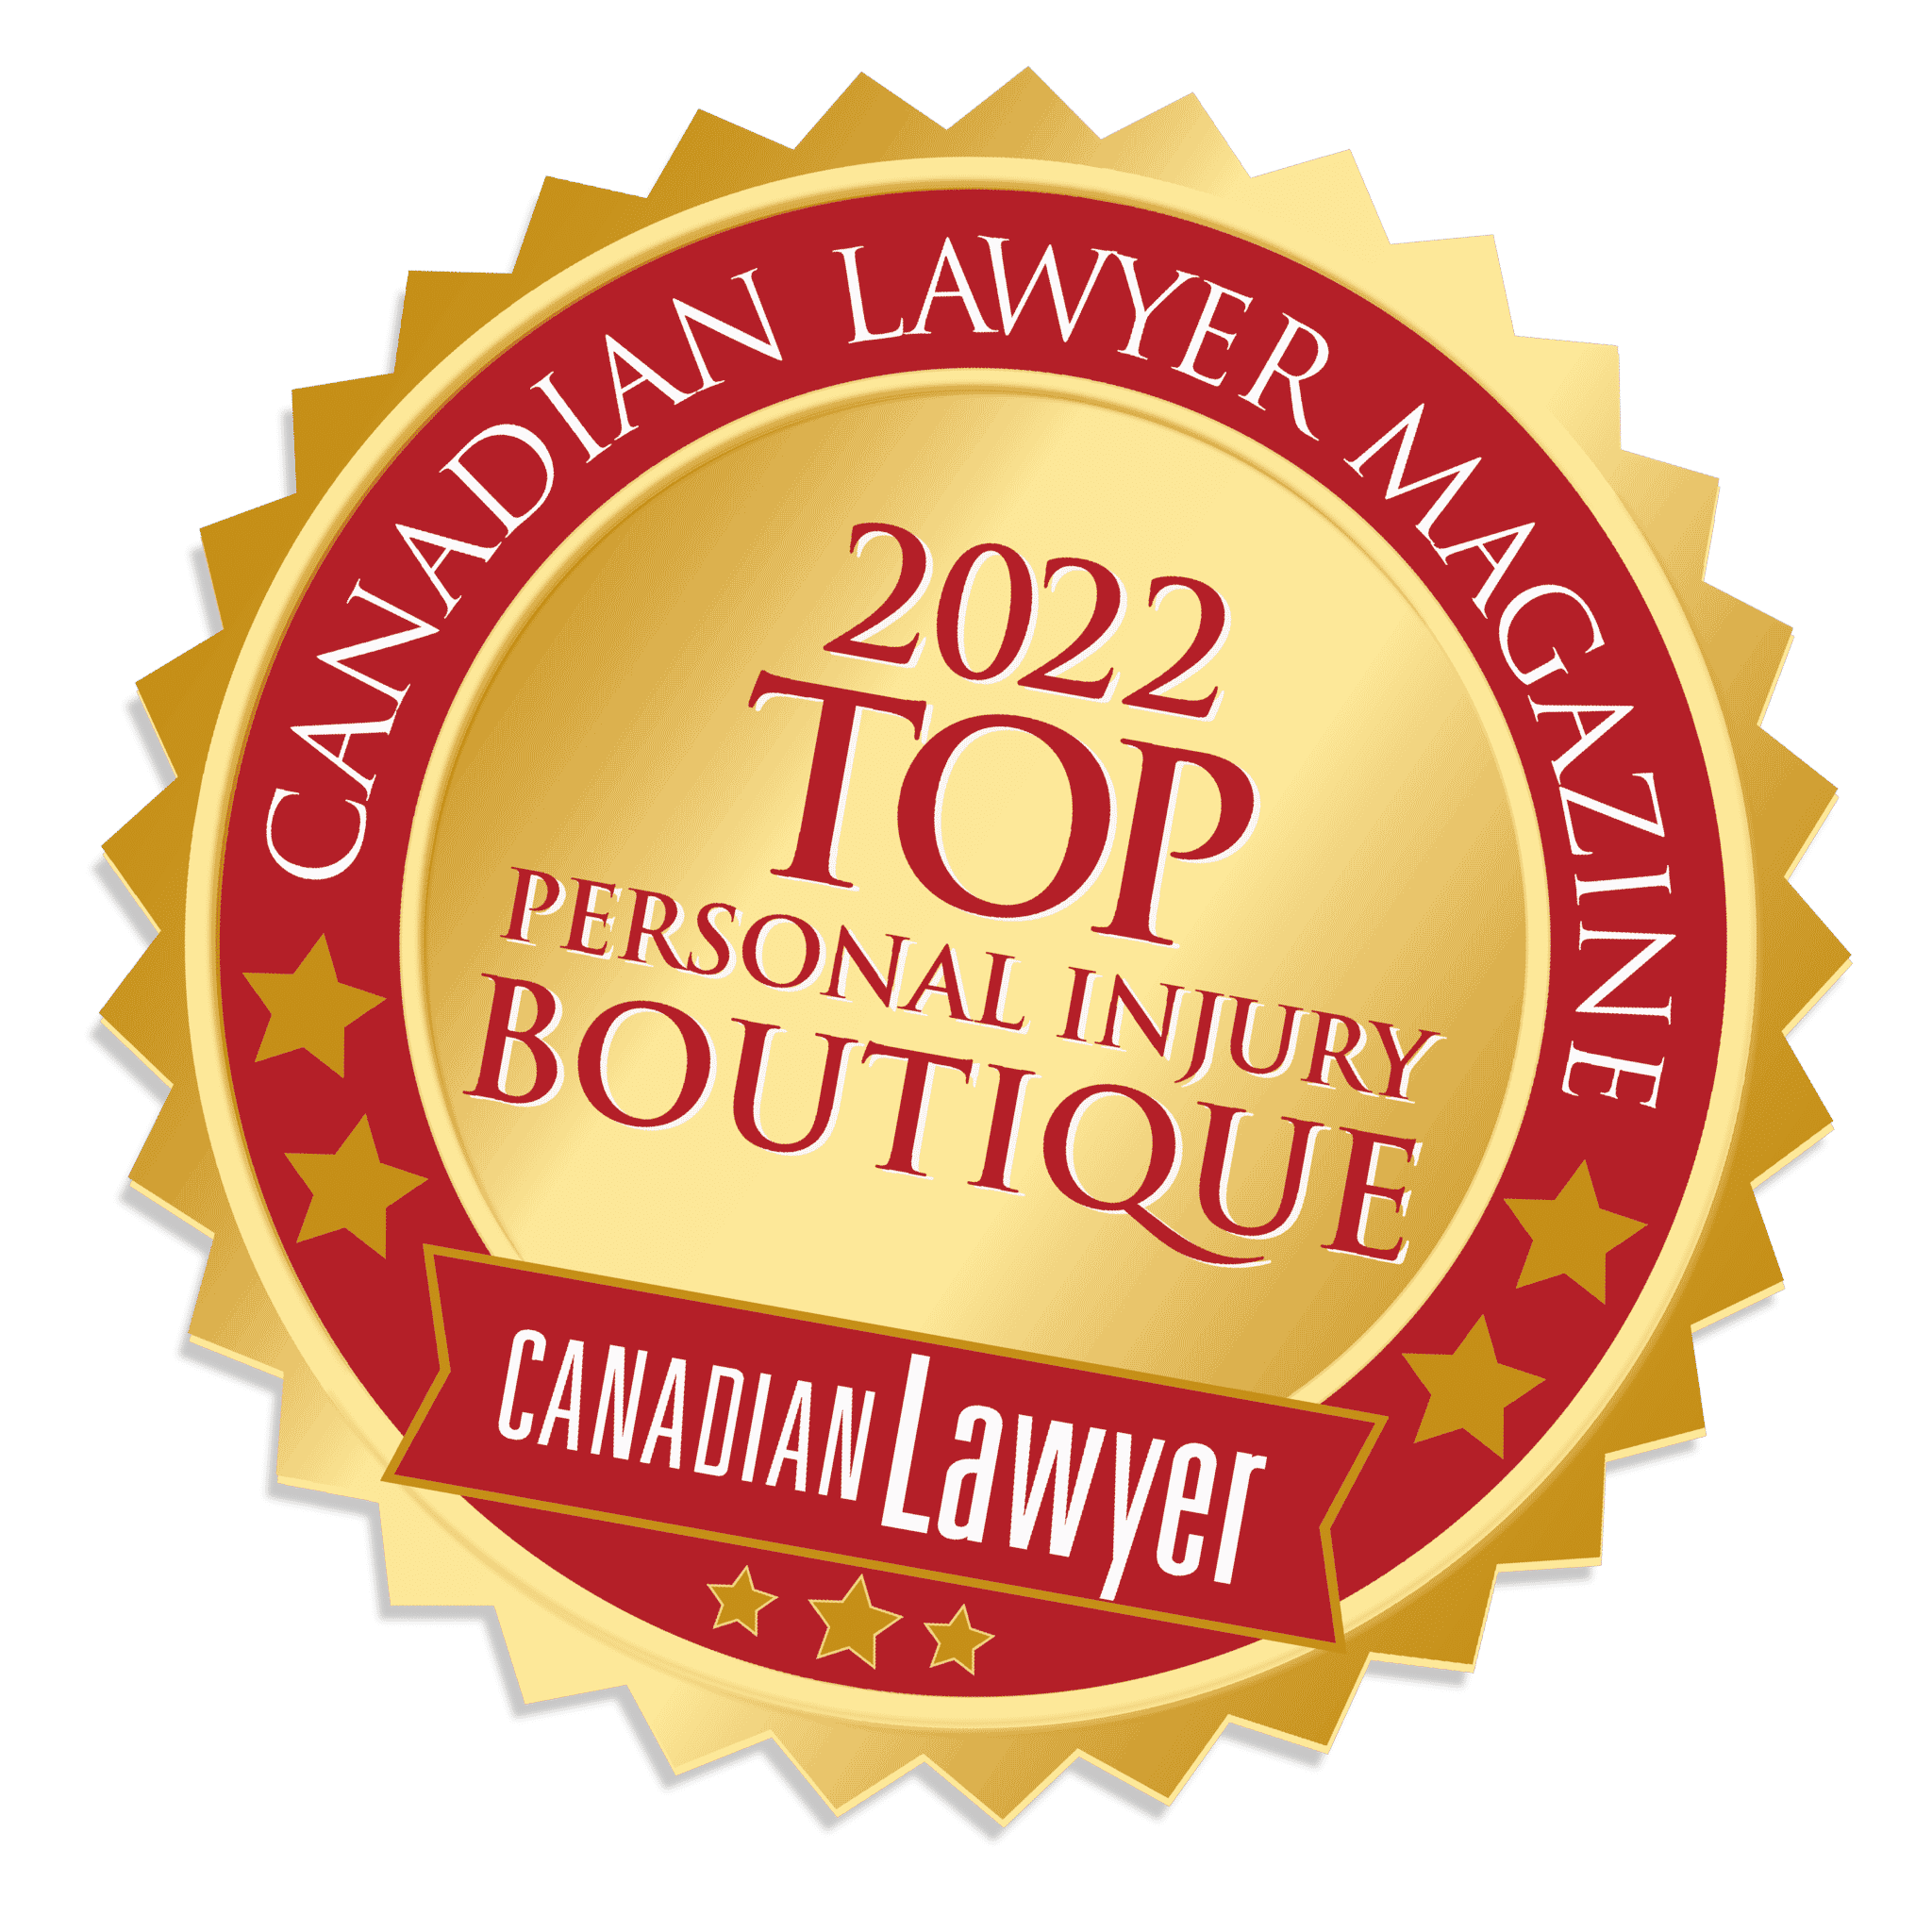 Howie, Sacks & Henry LLP – Personal Injury Law – Canadian Lawyer Magazine 2022